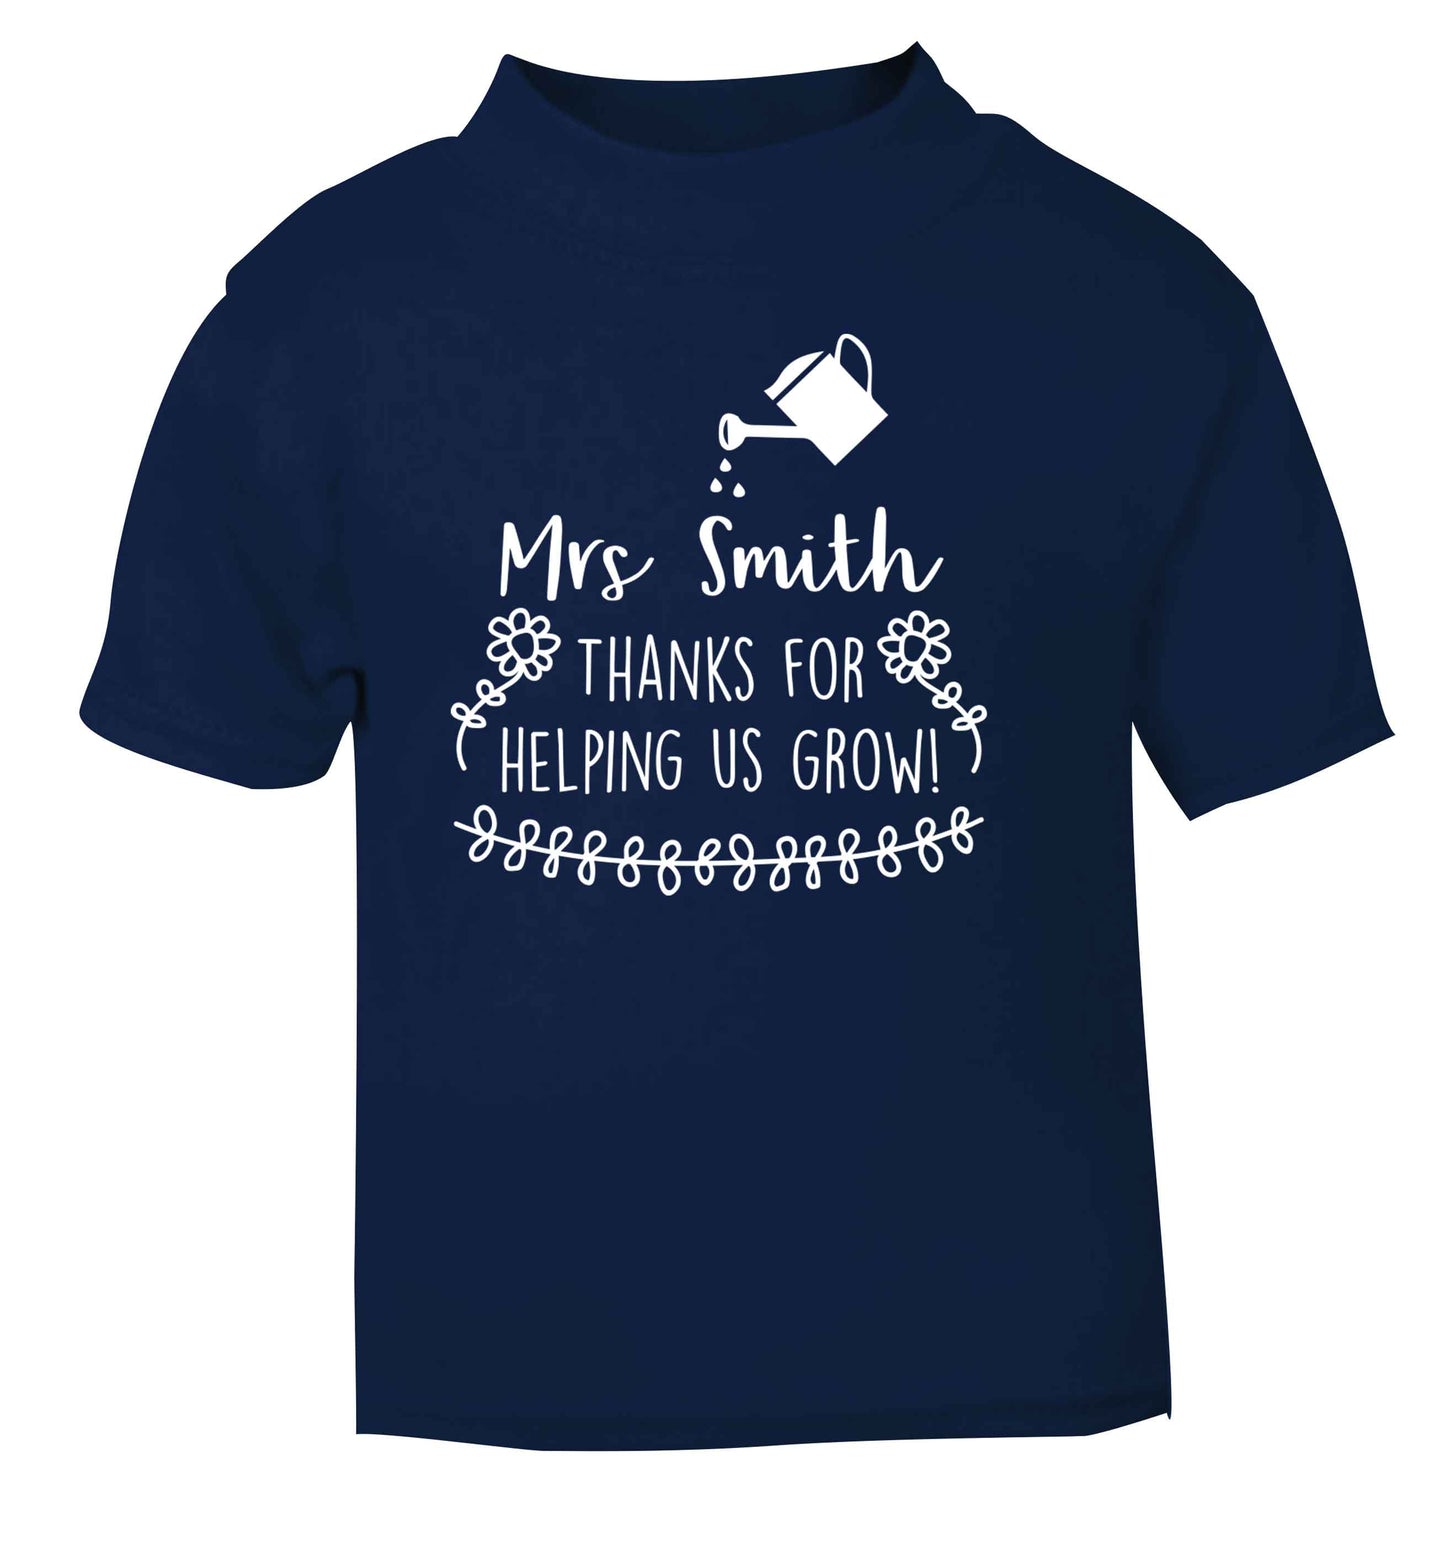 Personalised Mrs Smith thanks for helping us grow navy Baby Toddler Tshirt 2 Years